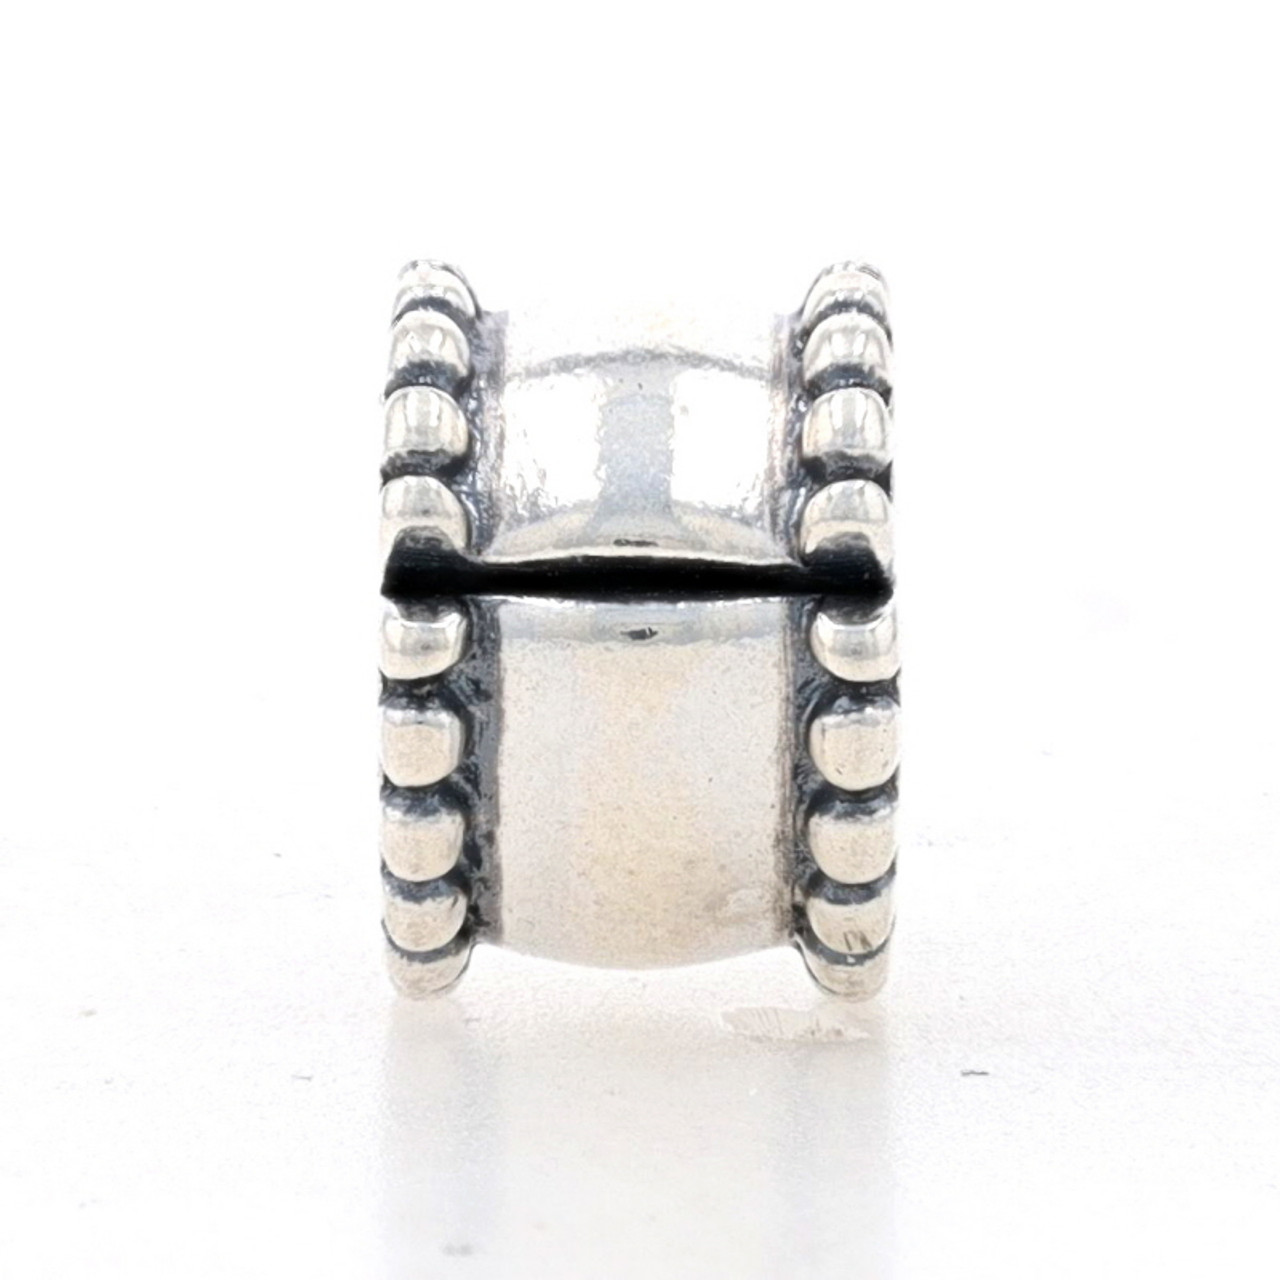 NEW Authentic Pandora Beveled Clip Charm - Sterling Silver Bead 